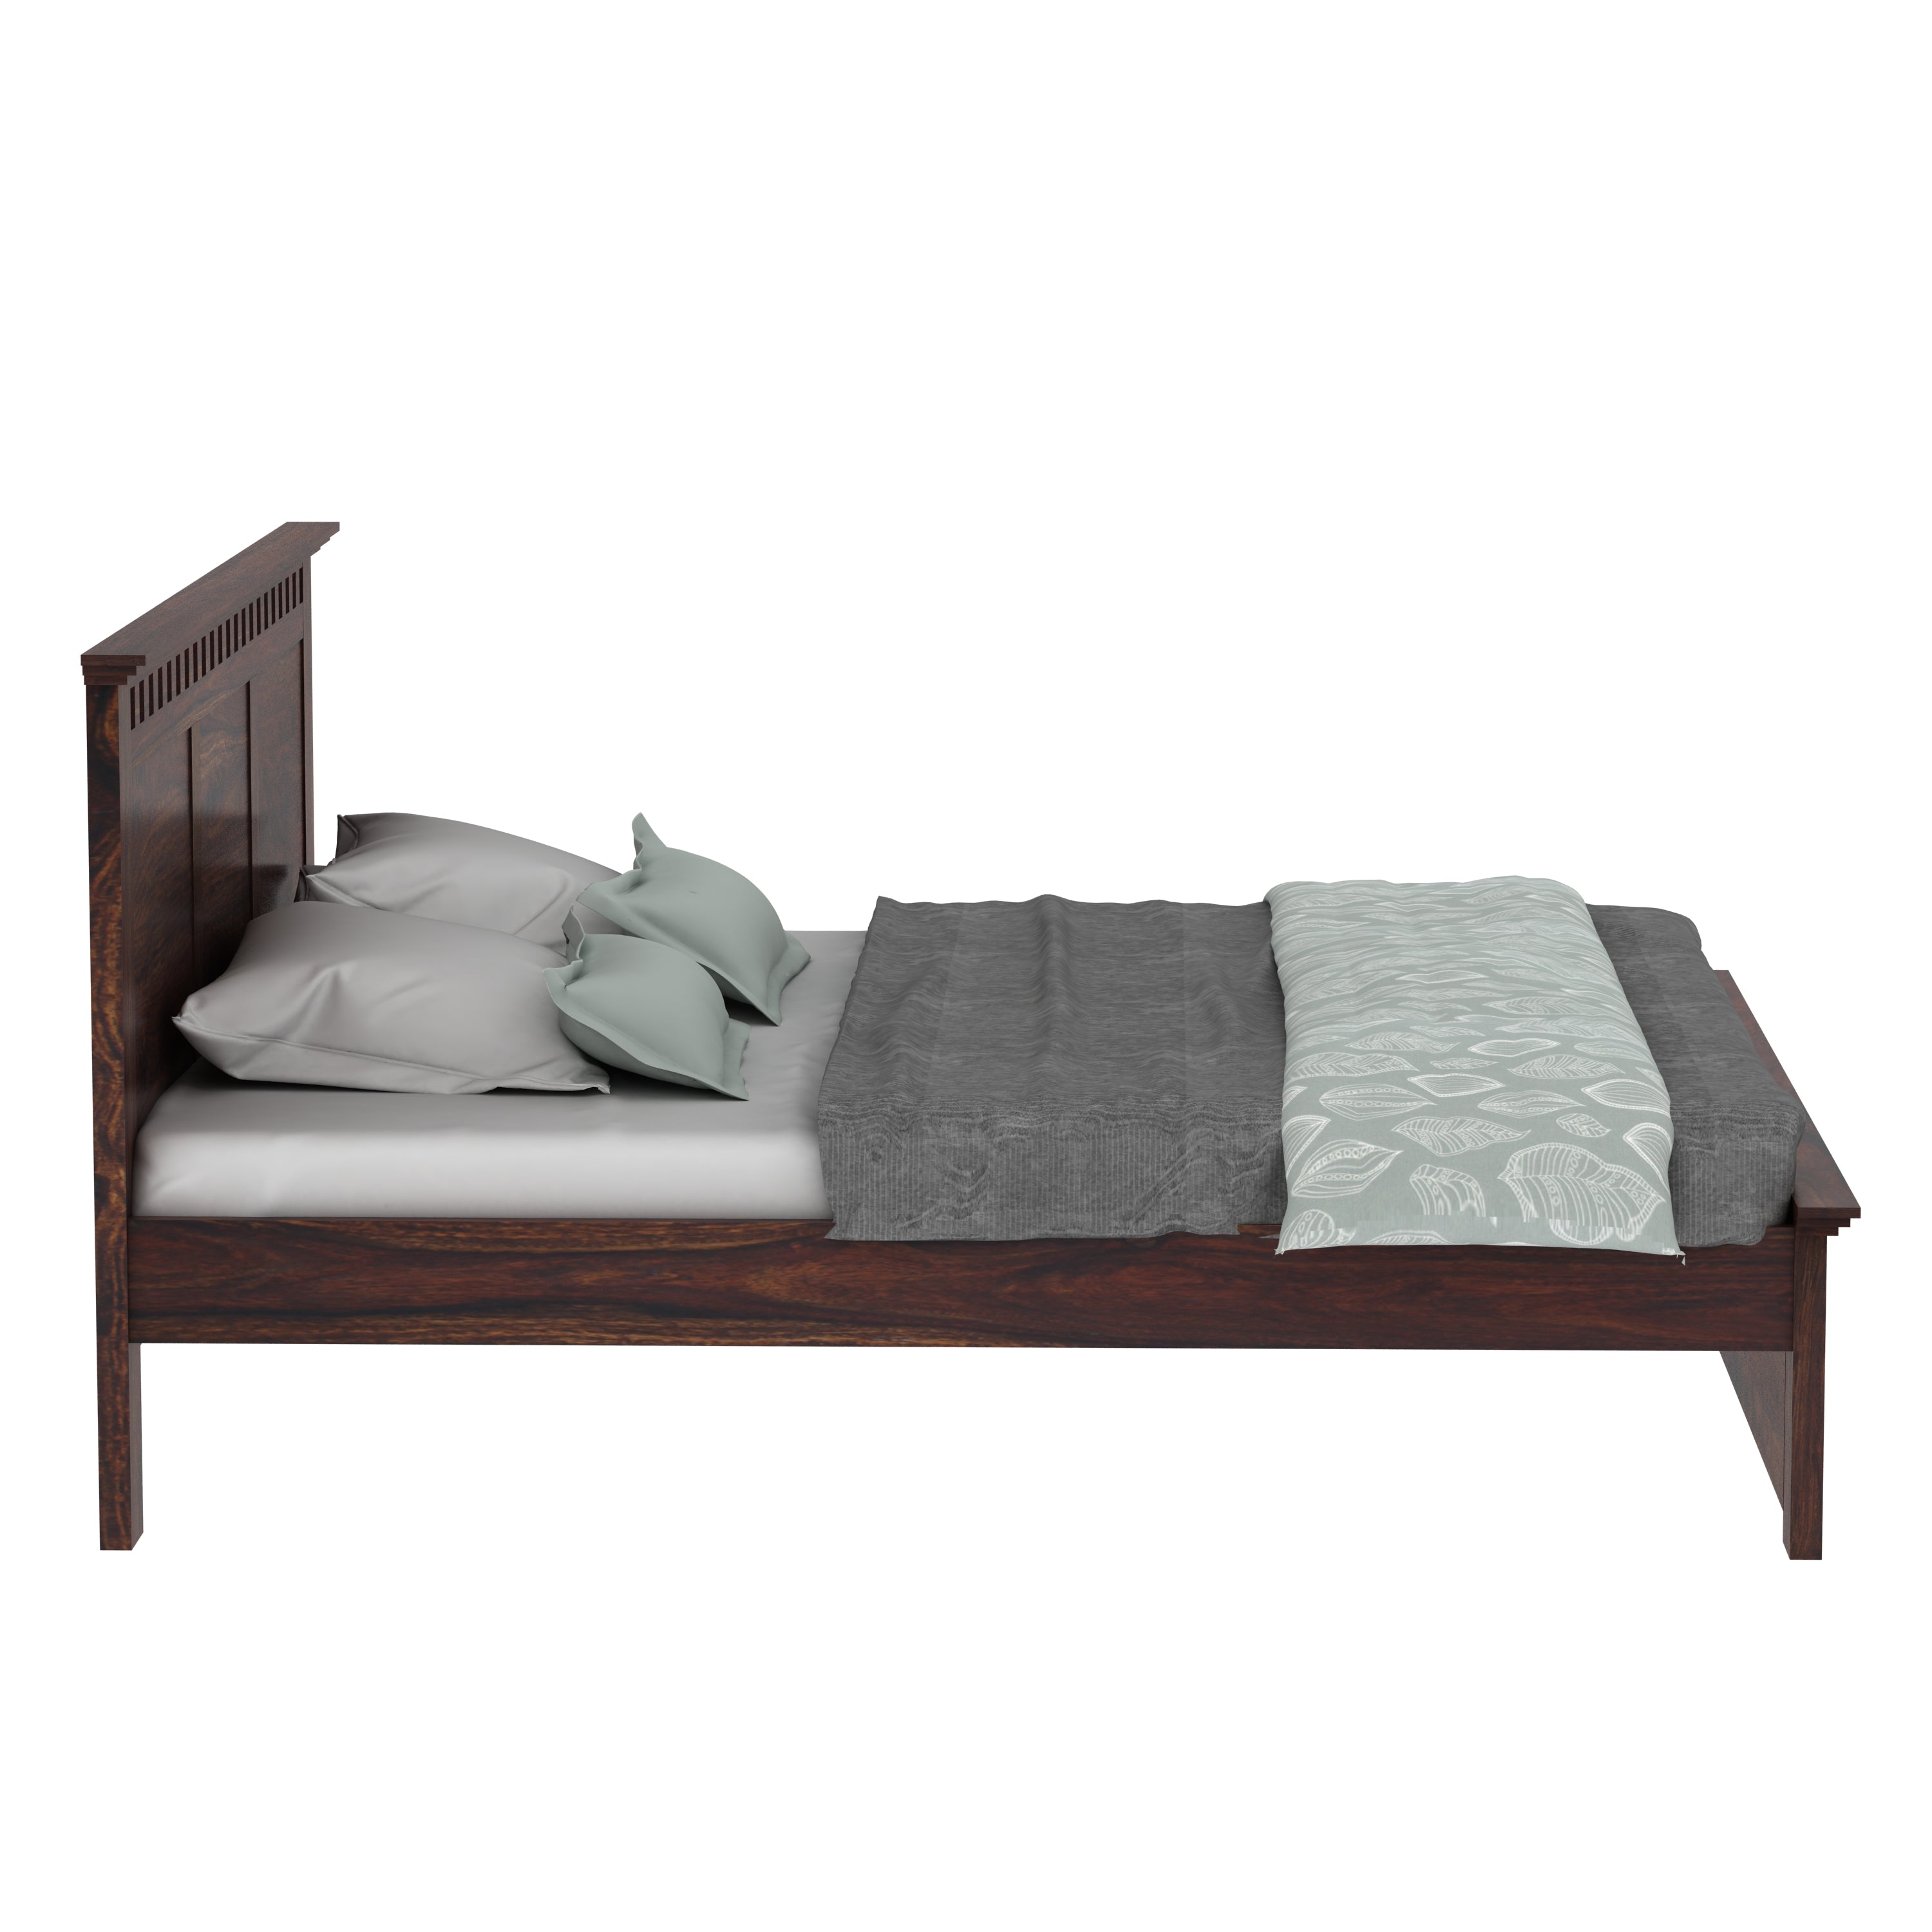 Amer Solid Sheesham Wood Bed Without Storage (Queen Size, Walnut Finish)